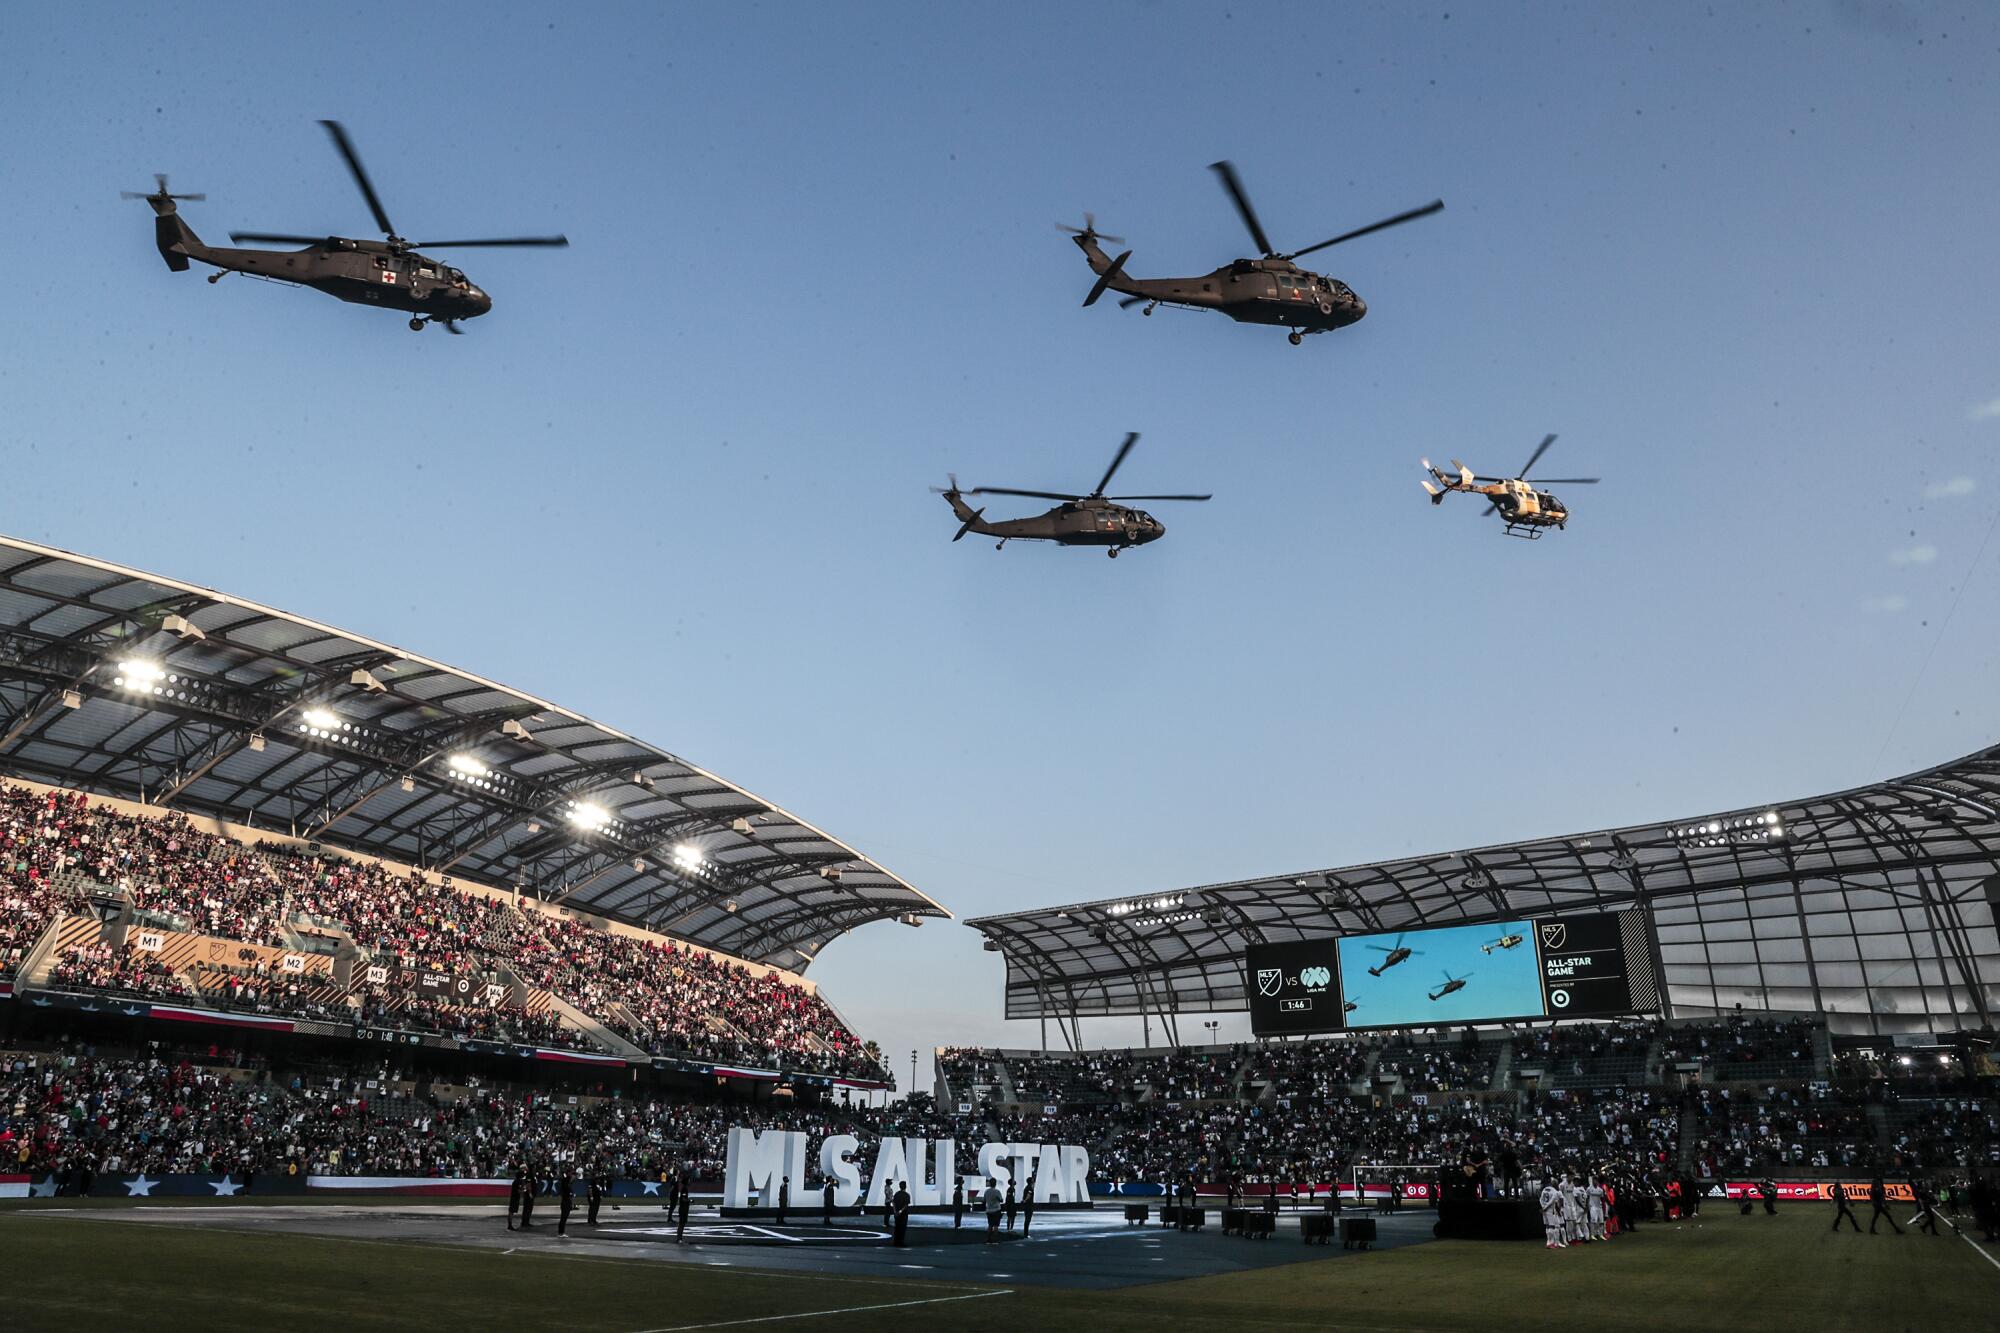 Helicopters fly over the stadium during pregame festivities as the MLS All-Star game